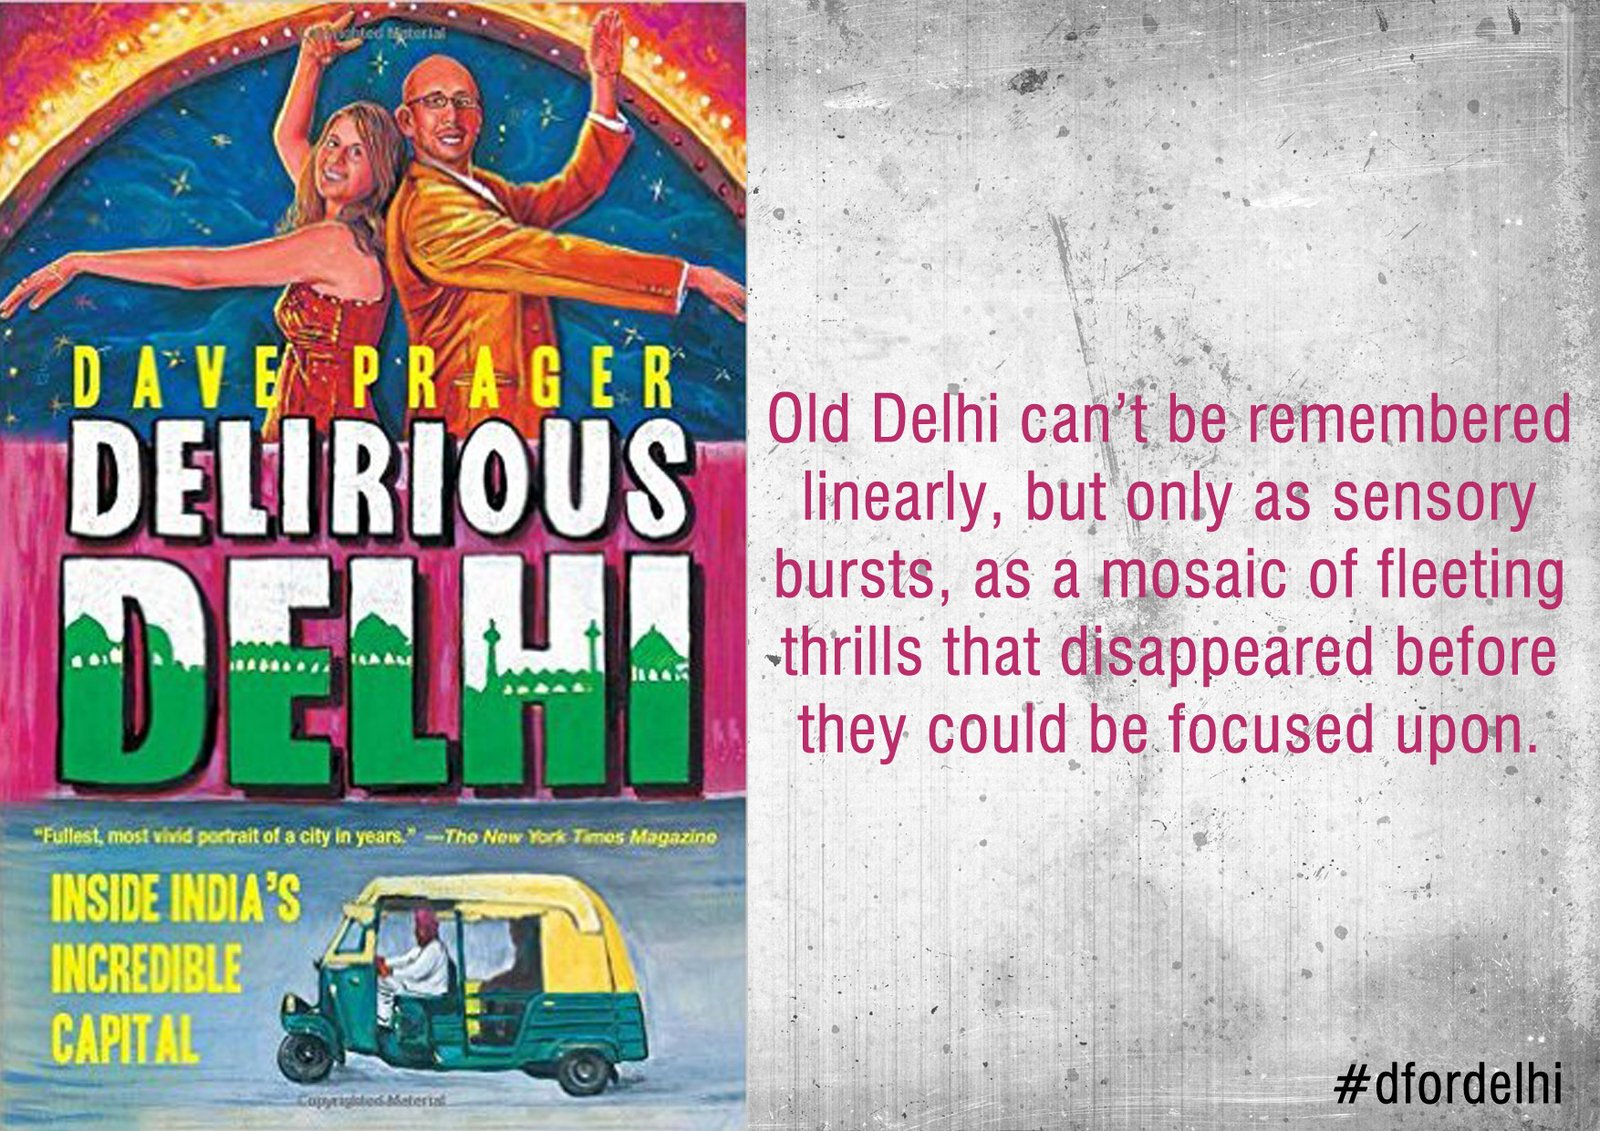 Books on Delhi : Have you read these books Dilliwala’s ?